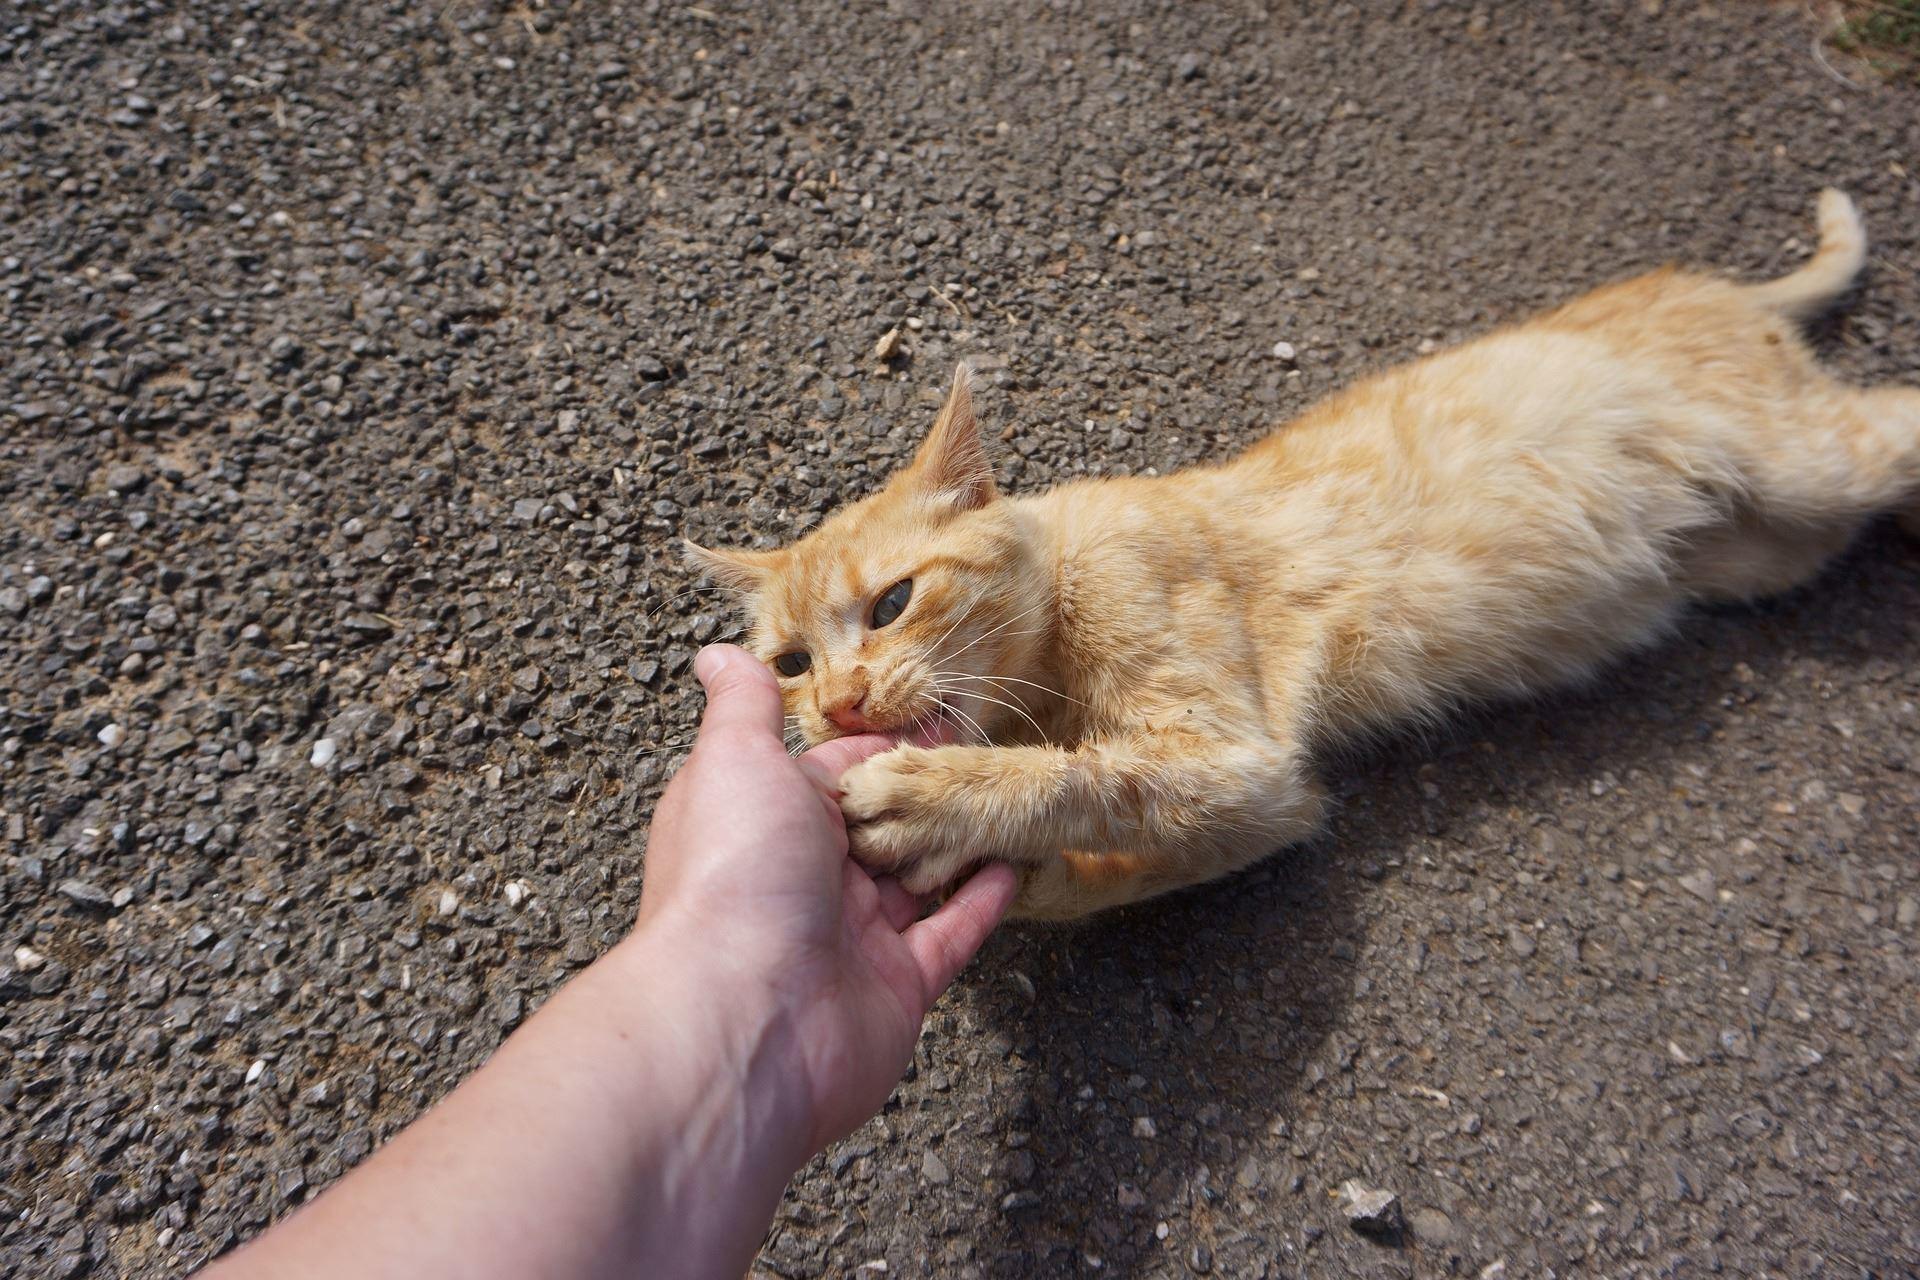 a ginger tabby cat lying on the ground and grabbing a person